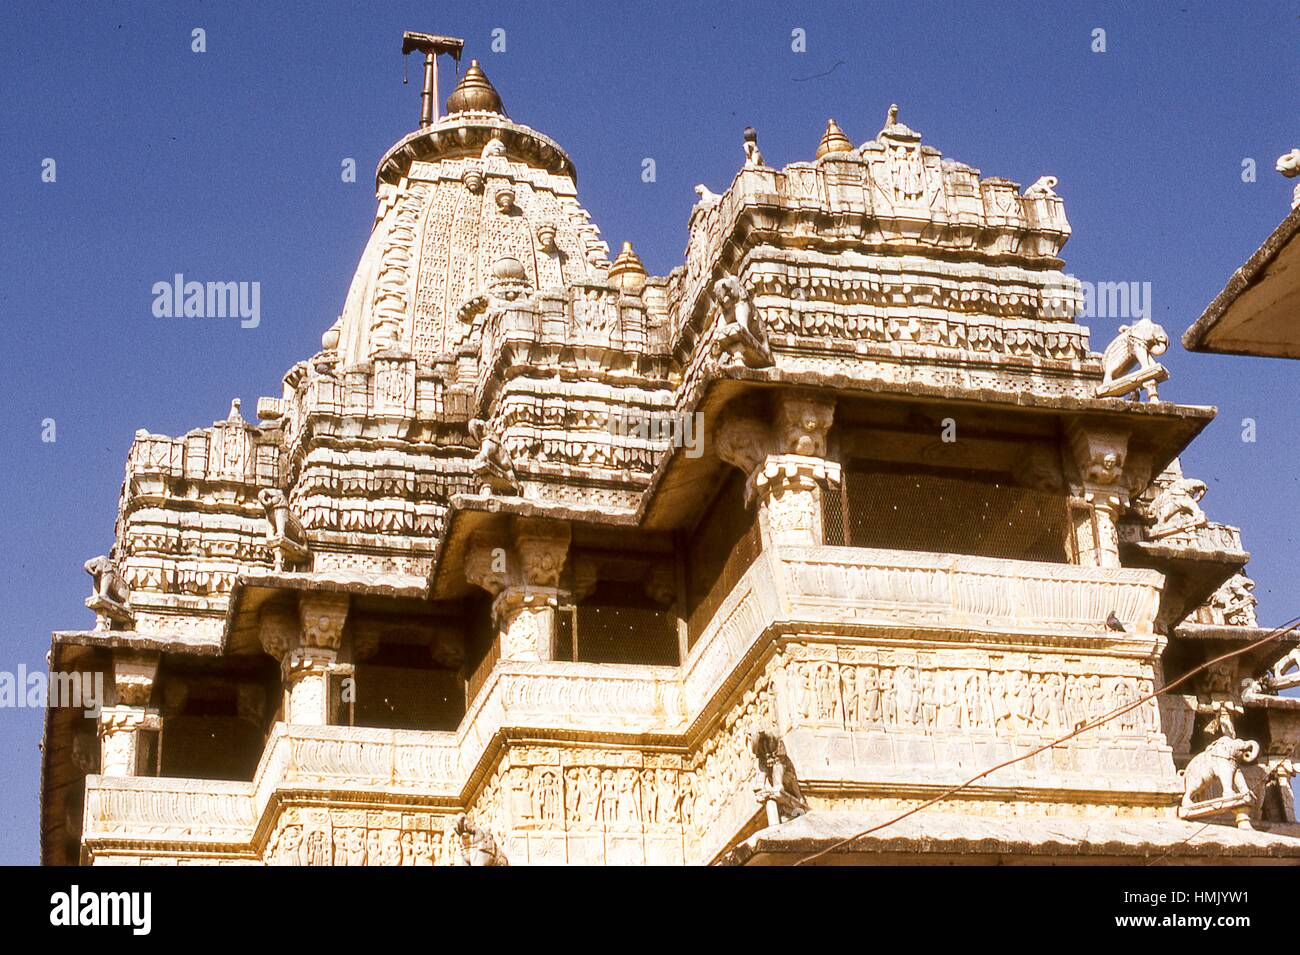 Detail view of elephant sculptures and embellished carvings decorating the walls and peaked roofs of the Jagdish Temple, Udaipur, Rajasthan, located in northwestern India, November, 1973. Stock Photo